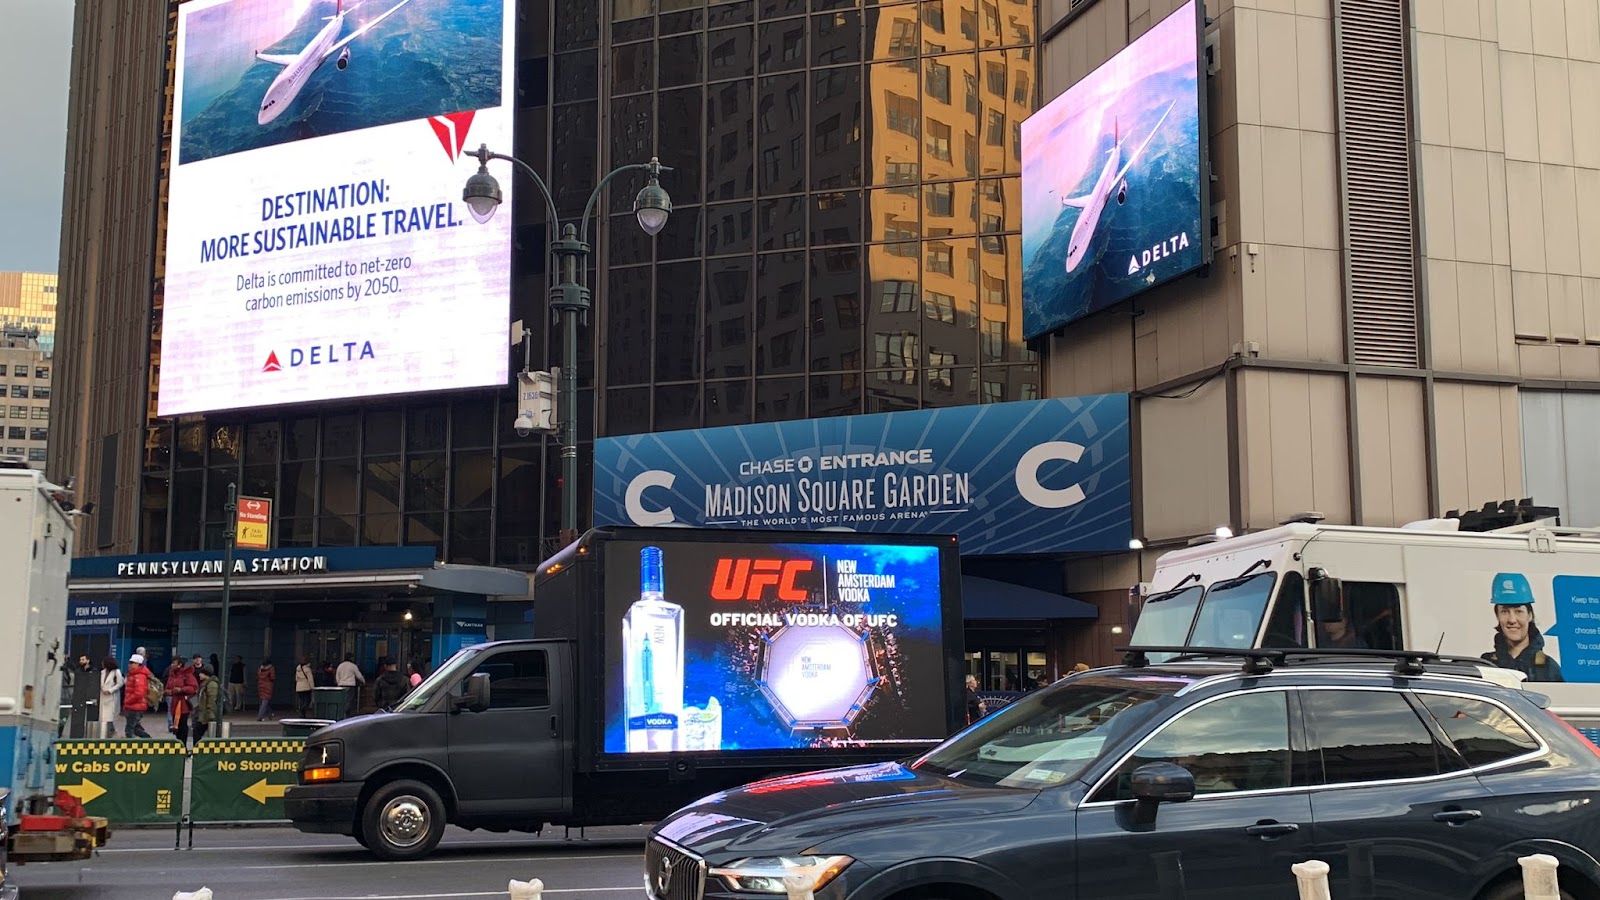 Cant Miss US's Billboard truck advertisement outside Madison Square Garden, New York City, advertises New Amsterdam Vodka UFC's official vodka.